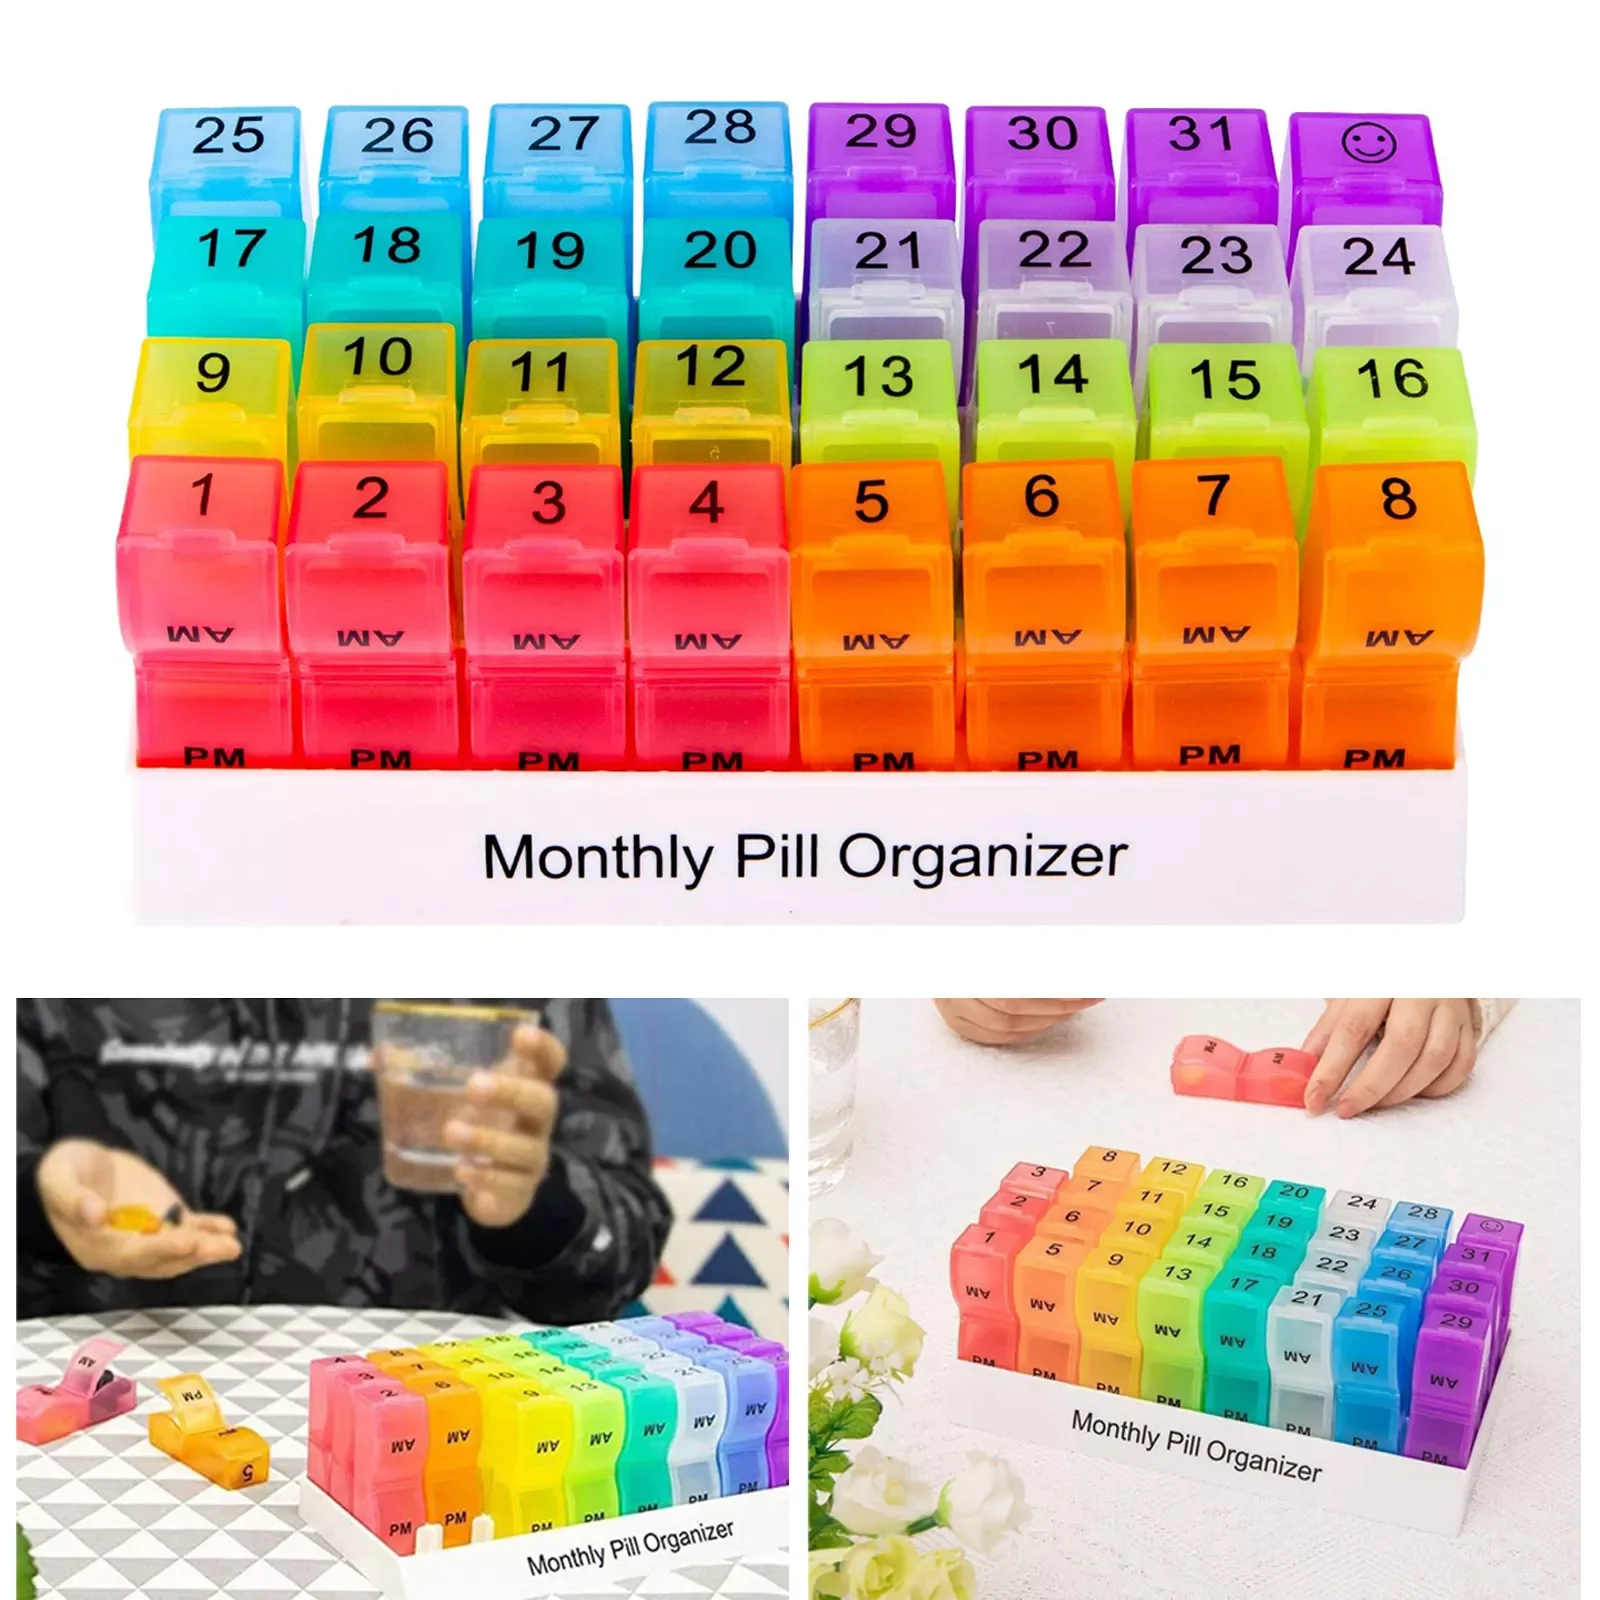 

Monthly Pill Organizer 32 Compartments Dispenser Box Container Large Compartments Colorful Tablet Organiser